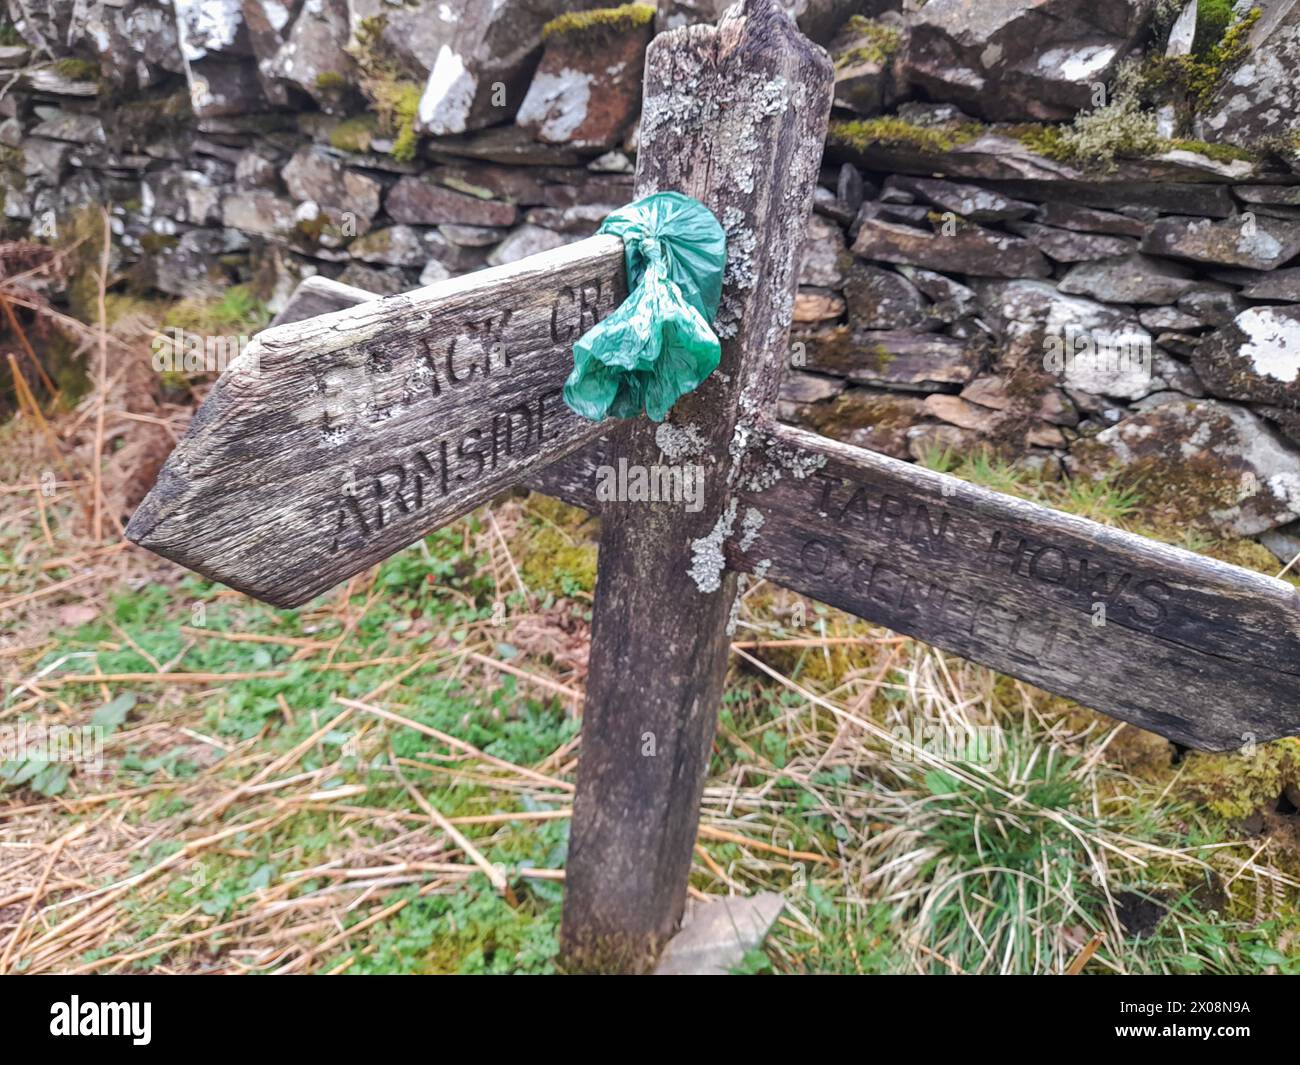 A rather delightfully placed dog poo bag on a signpost near Tarn Hows in the Lake District Stock Photo